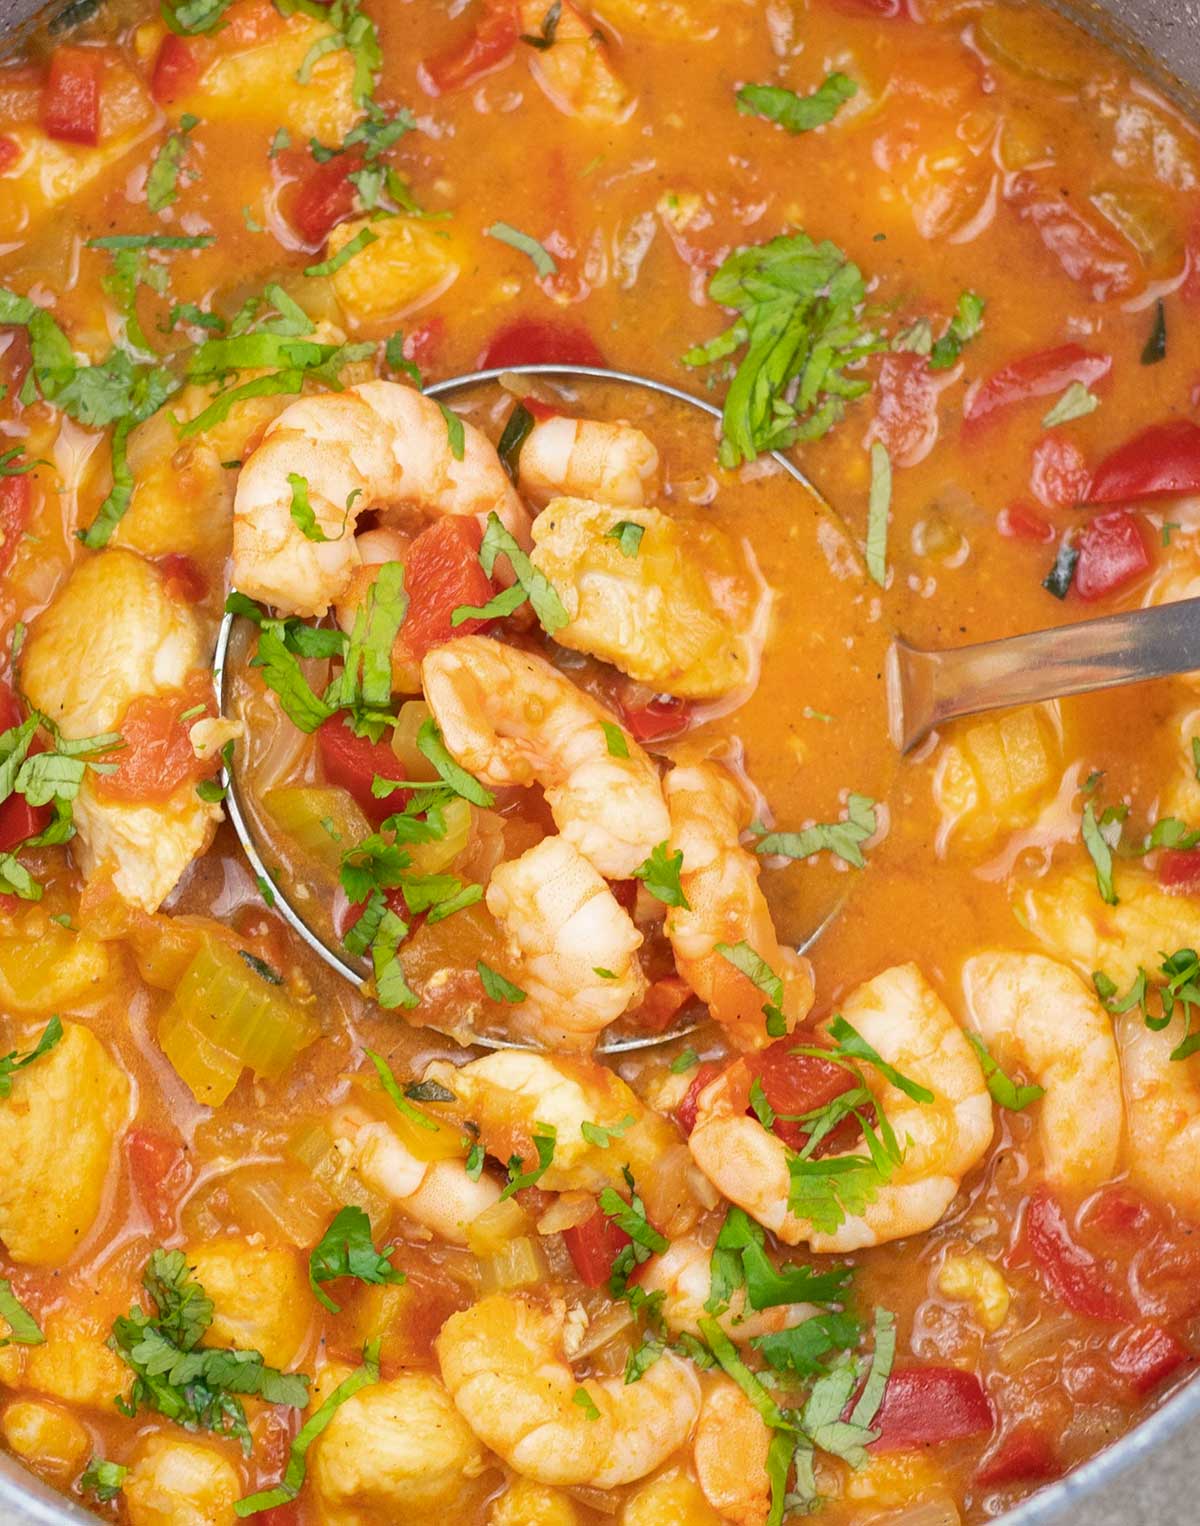 Caribbean seafood stew in the pot.